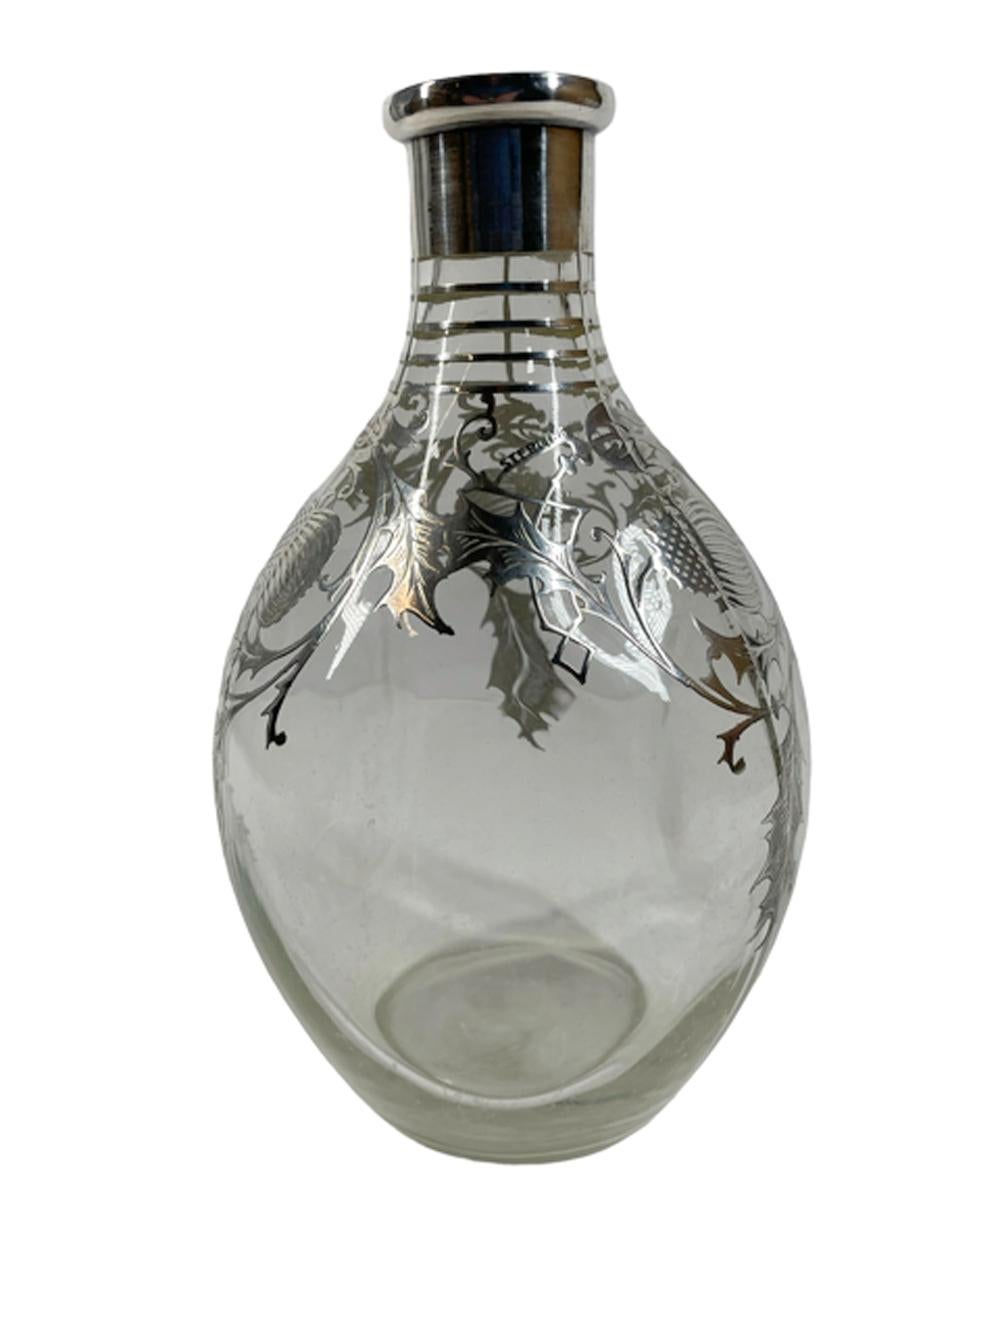 Art Deco clear glass pinch decanter, dimpled on three sides and with silver overlay grid around the neck and a silver overlay collar, the shoulders and sides decorated with thistle leaves and flowers with the word sterling incorporated into the